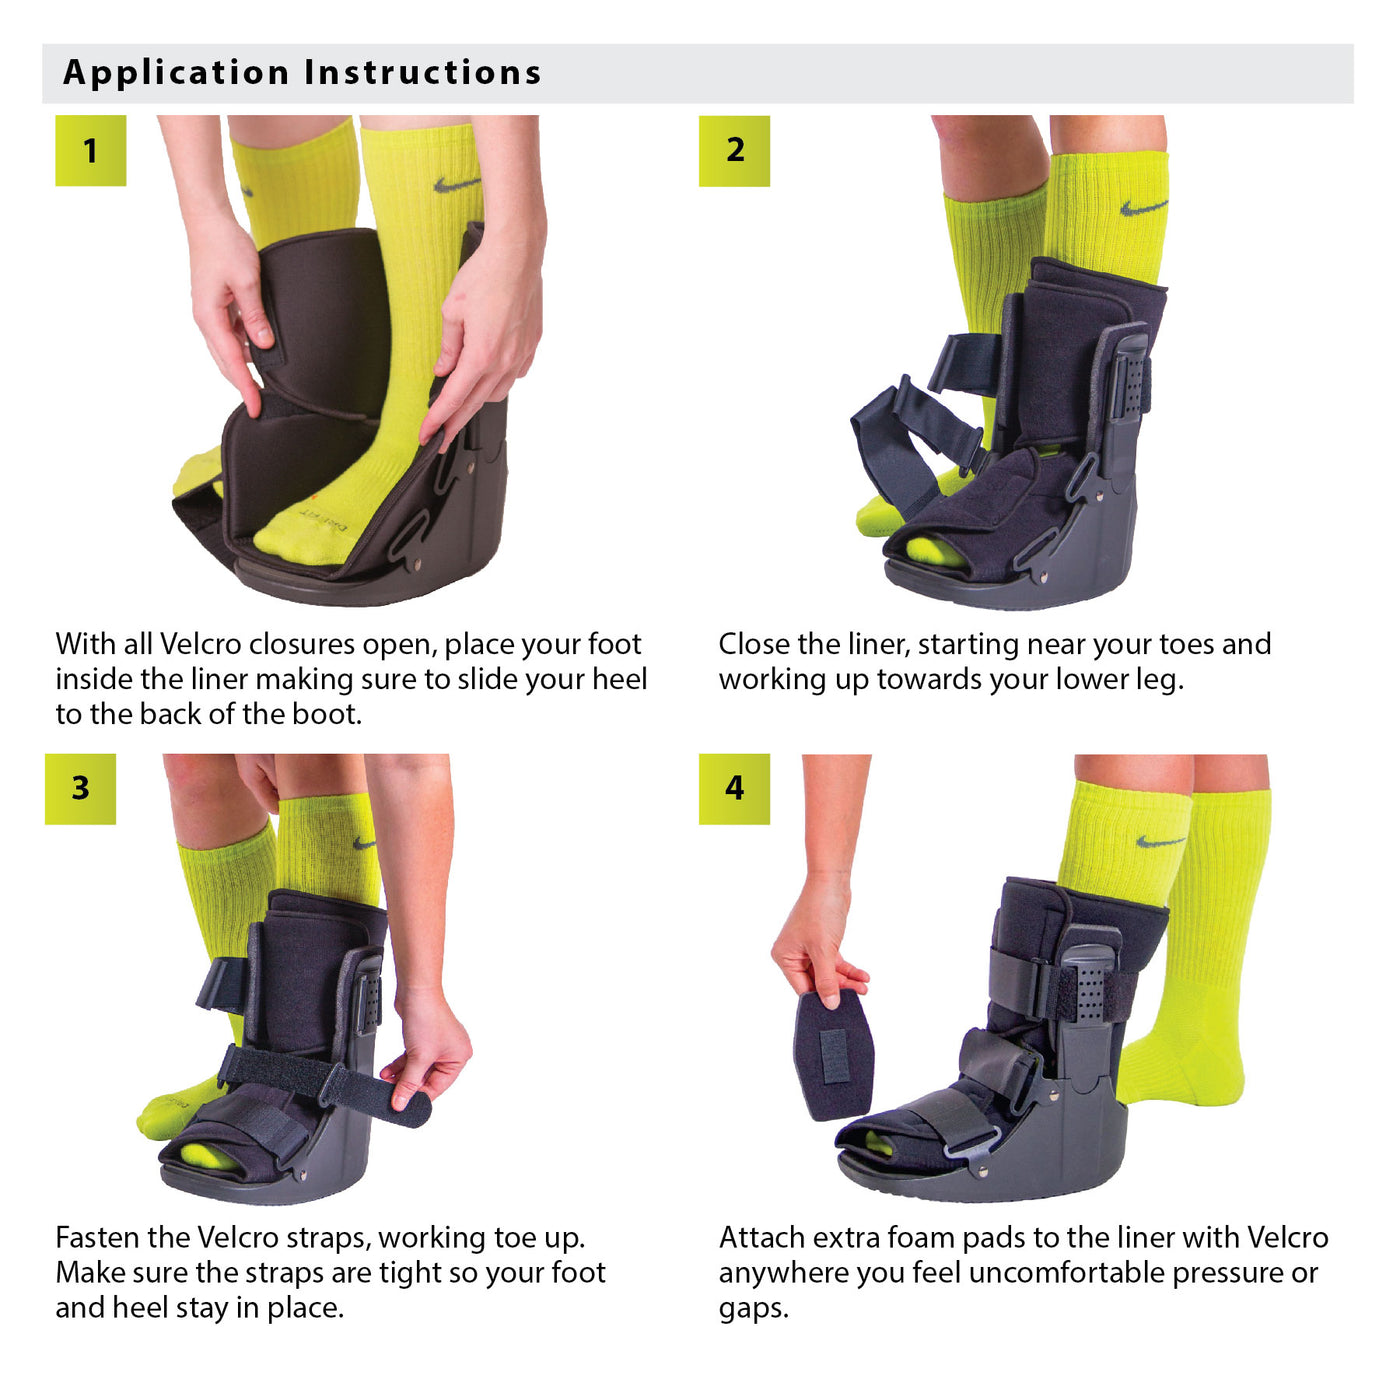 How to put on the short fracture boot instruction sheet